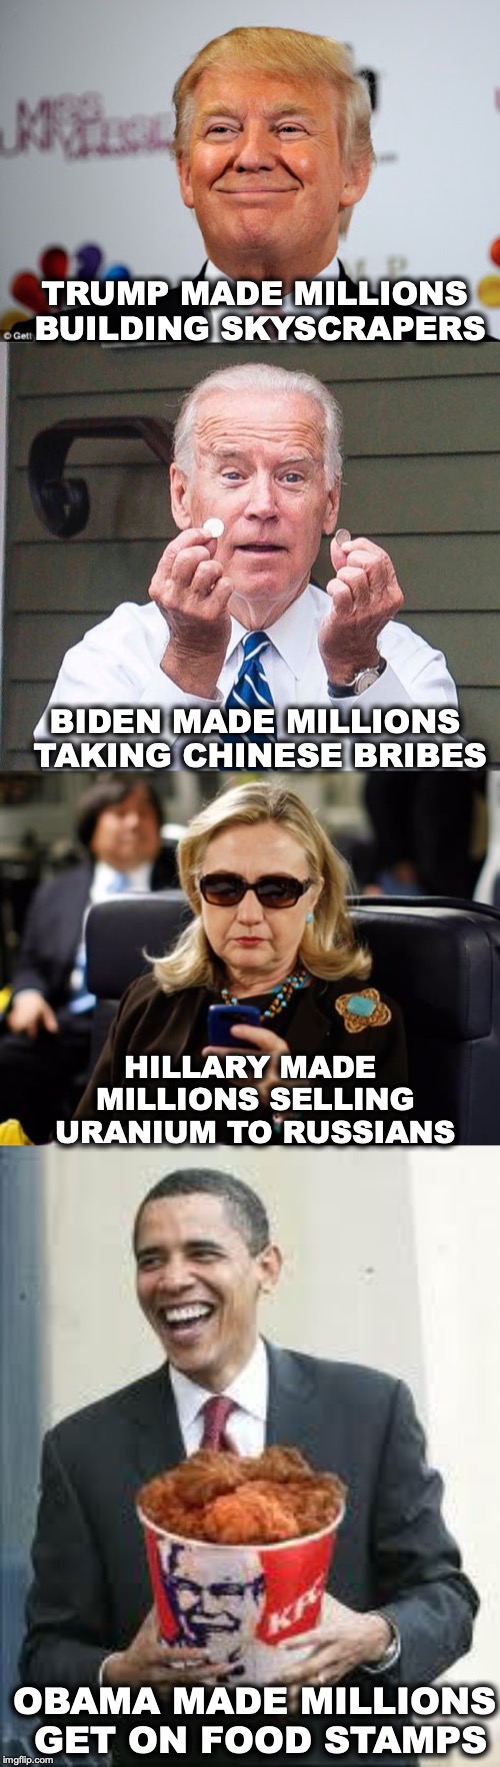 Millionaires | TRUMP MADE MILLIONS BUILDING SKYSCRAPERS; BIDEN MADE MILLIONS TAKING CHINESE BRIBES; HILLARY MADE MILLIONS SELLING URANIUM TO RUSSIANS; OBAMA MADE MILLIONS GET ON FOOD STAMPS | image tagged in million,donald trump,joe biden,hillary,obama | made w/ Imgflip meme maker